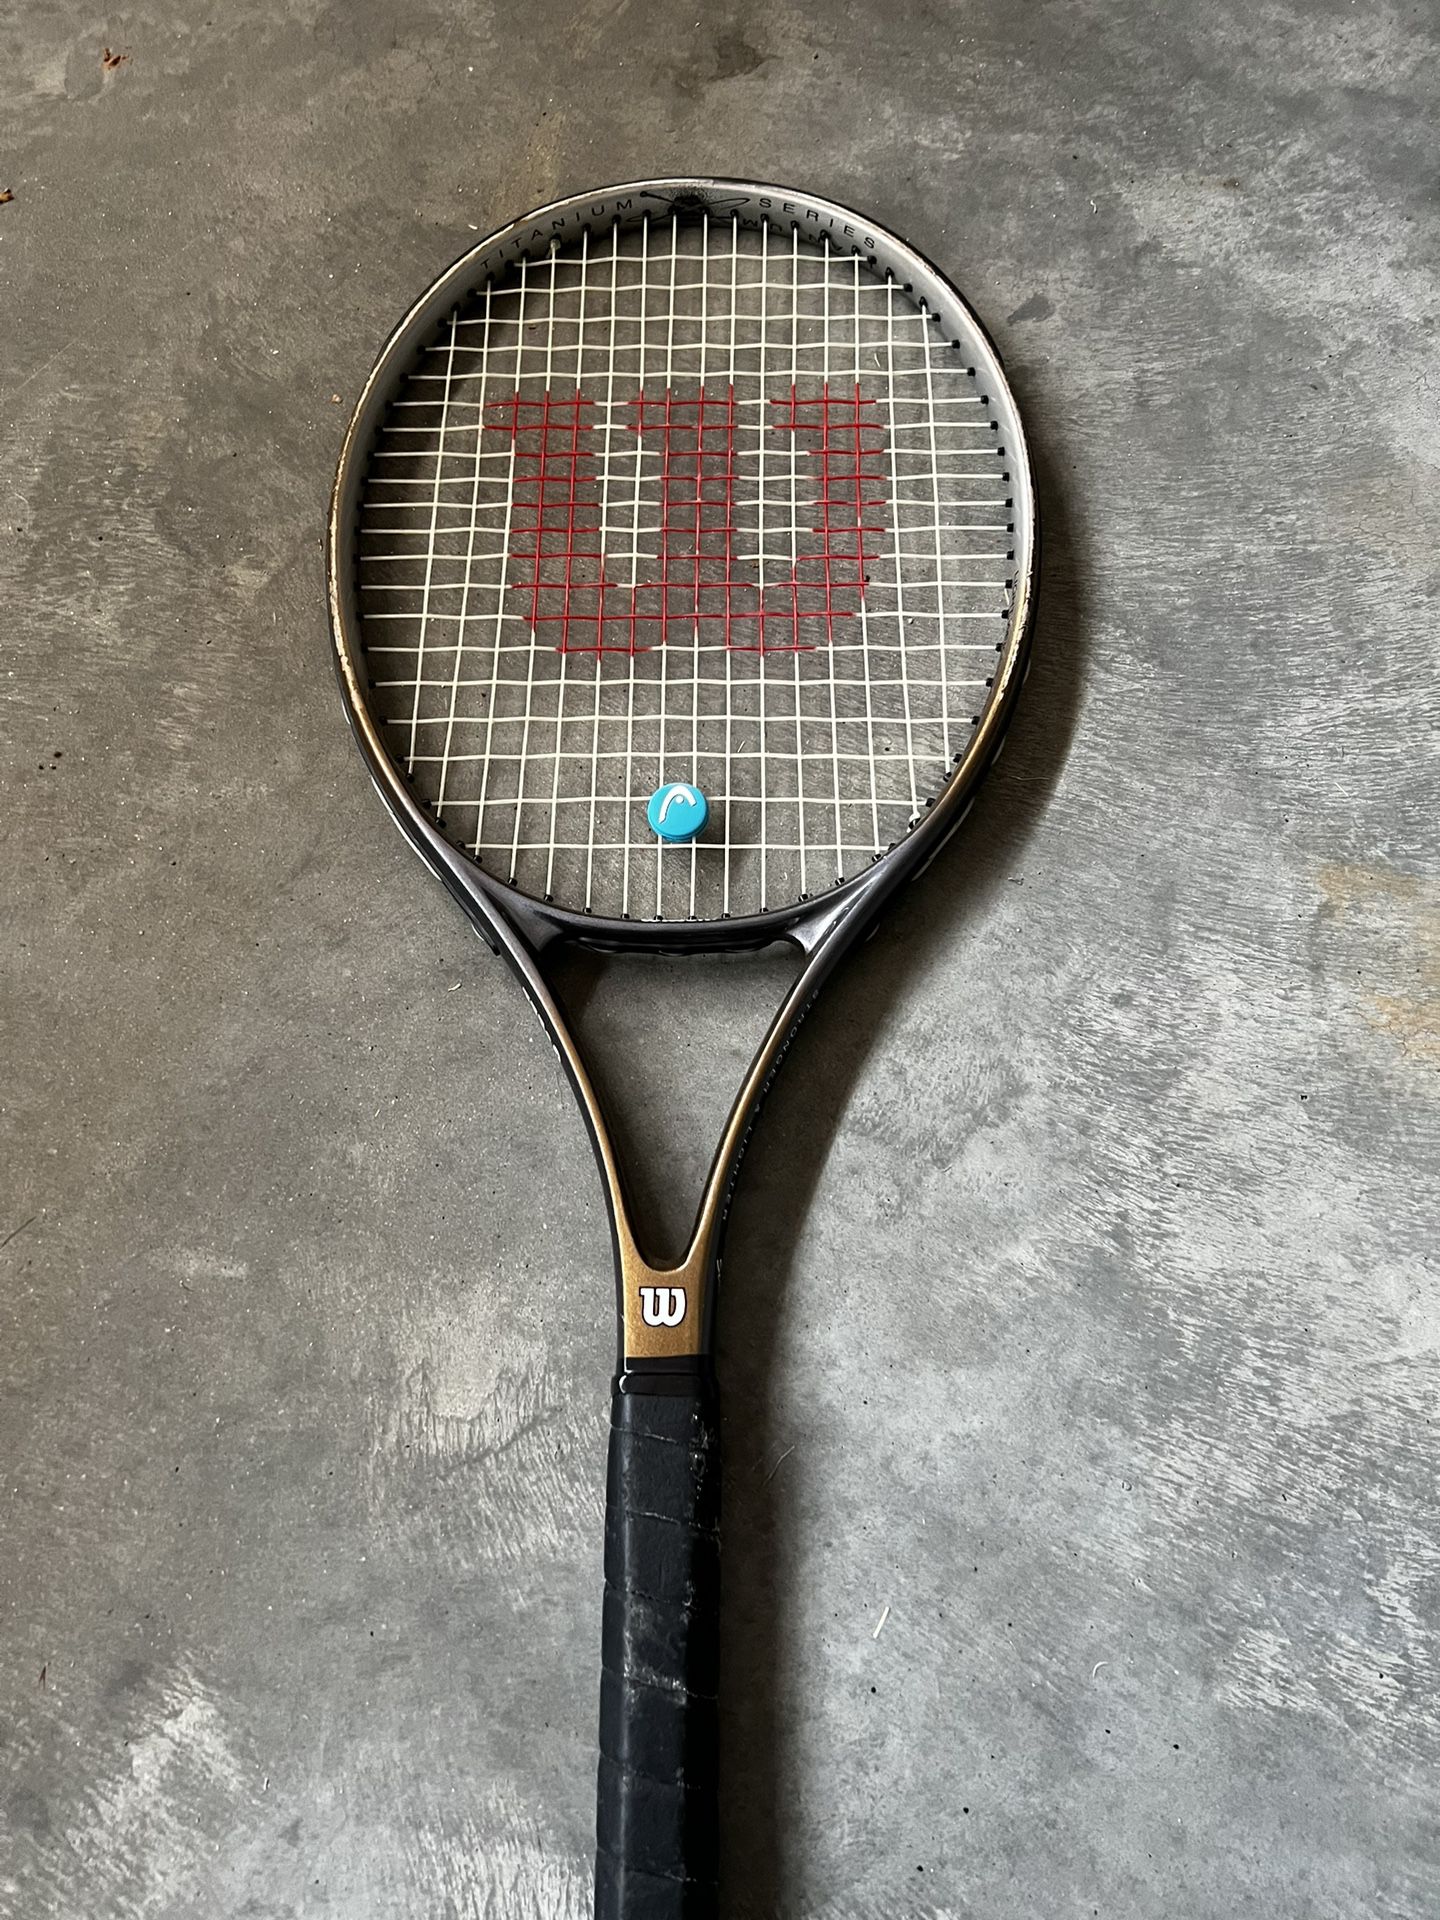 Tennis Rackets 23 And 26 Inches